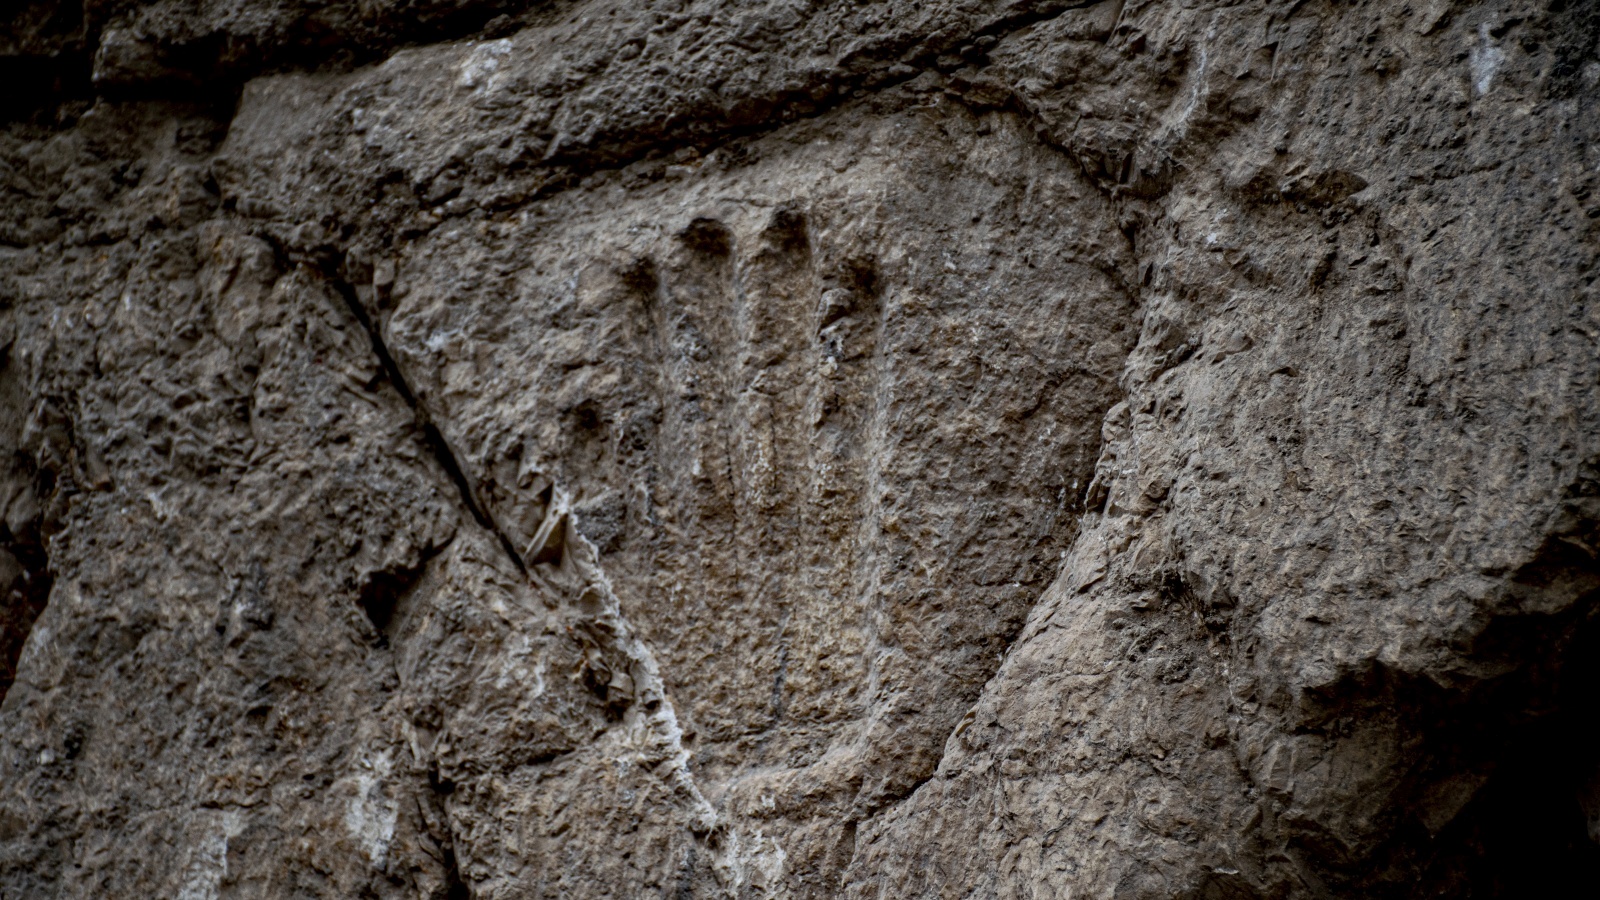 Mysterious handprint excavated in ancient Jerusalem moat